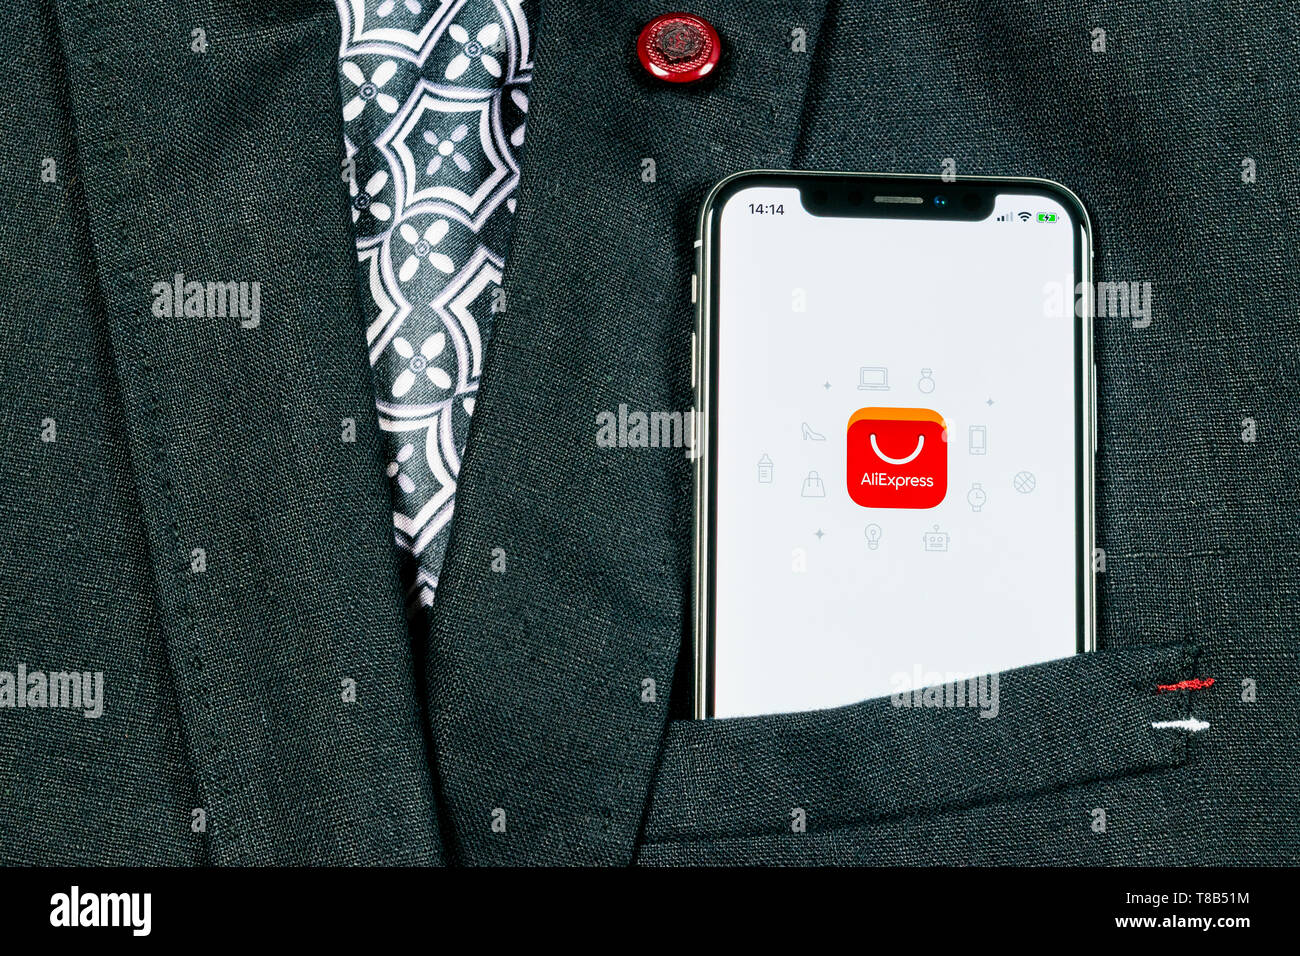 Sankt-Petersburg, Russia, August 24, 2018: Aliexpress application icon on Apple iPhone X smartphone screen cin jacket pocket. Aliexpress app icon. Ali Stock Photo